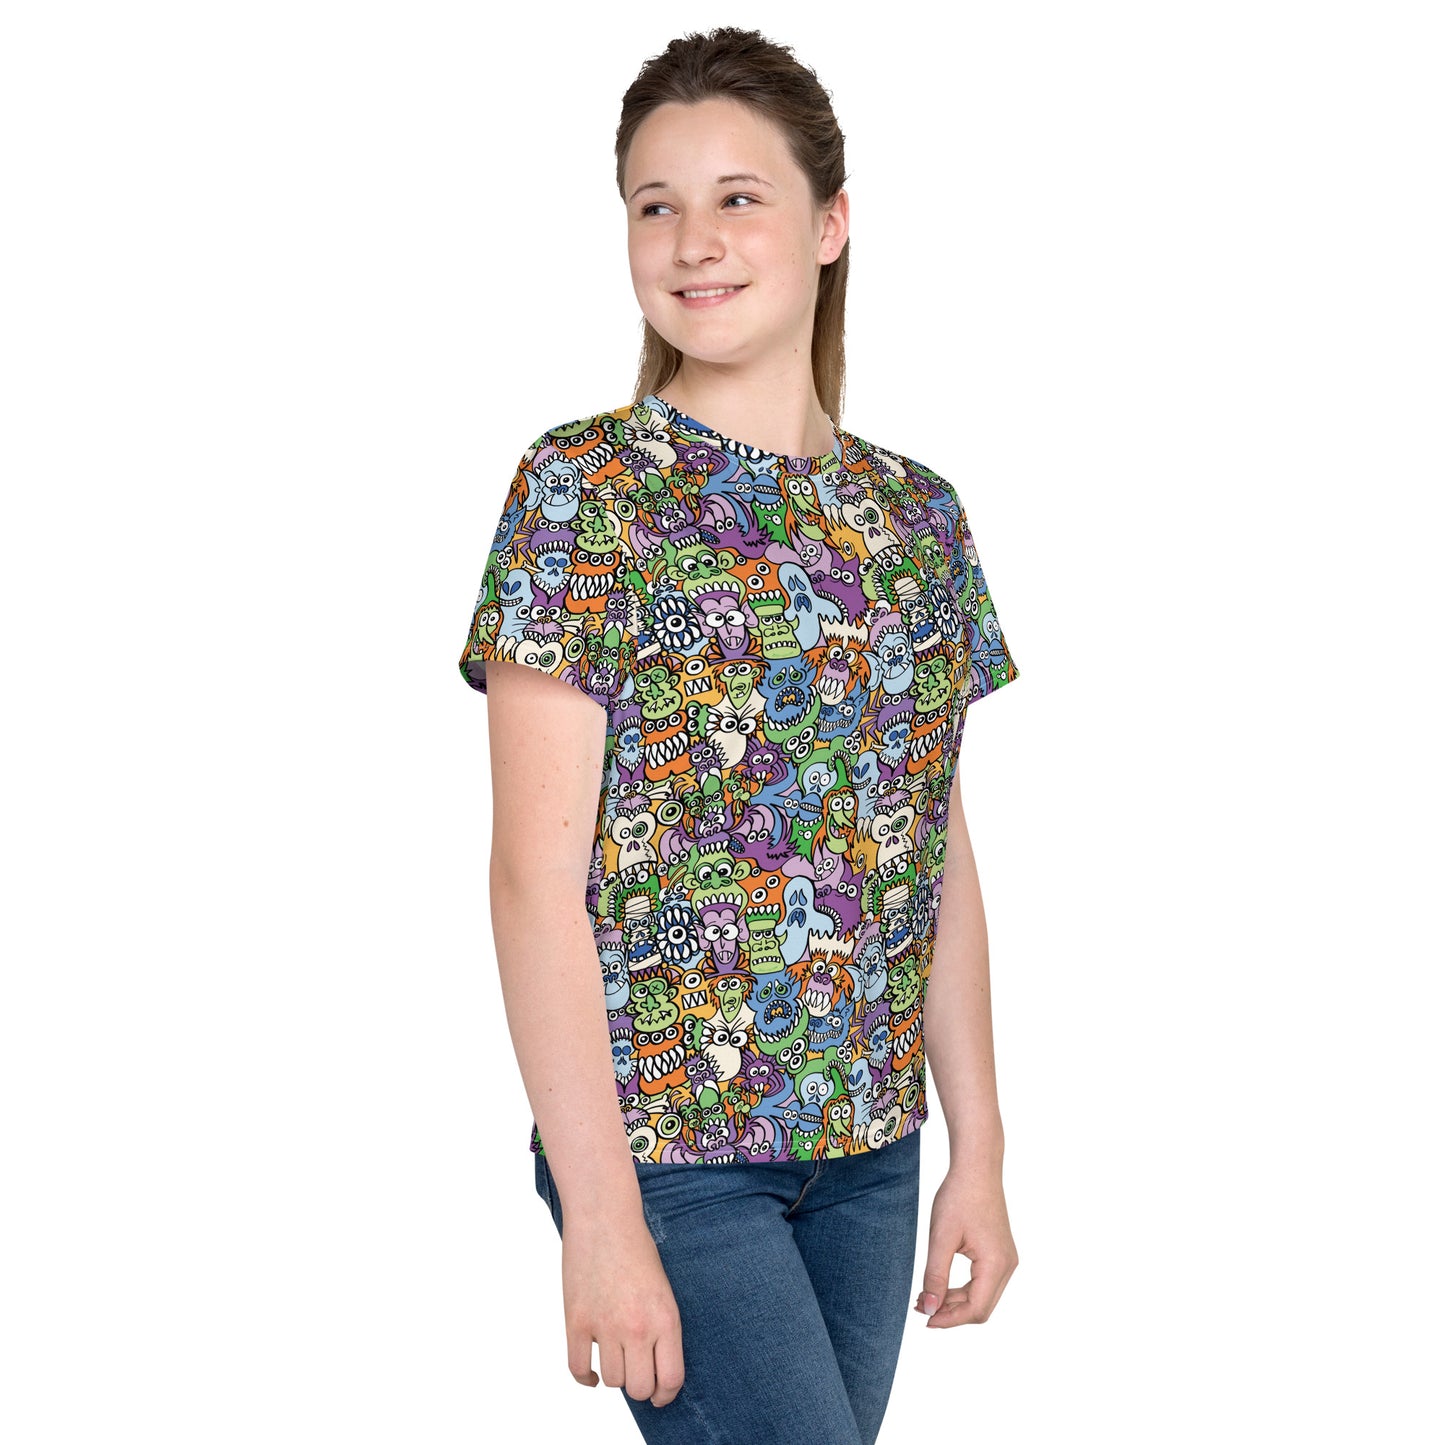 All the spooky Halloween monsters in a pattern design Youth crew neck t-shirt. Girl wearing All-over print T-Shirt